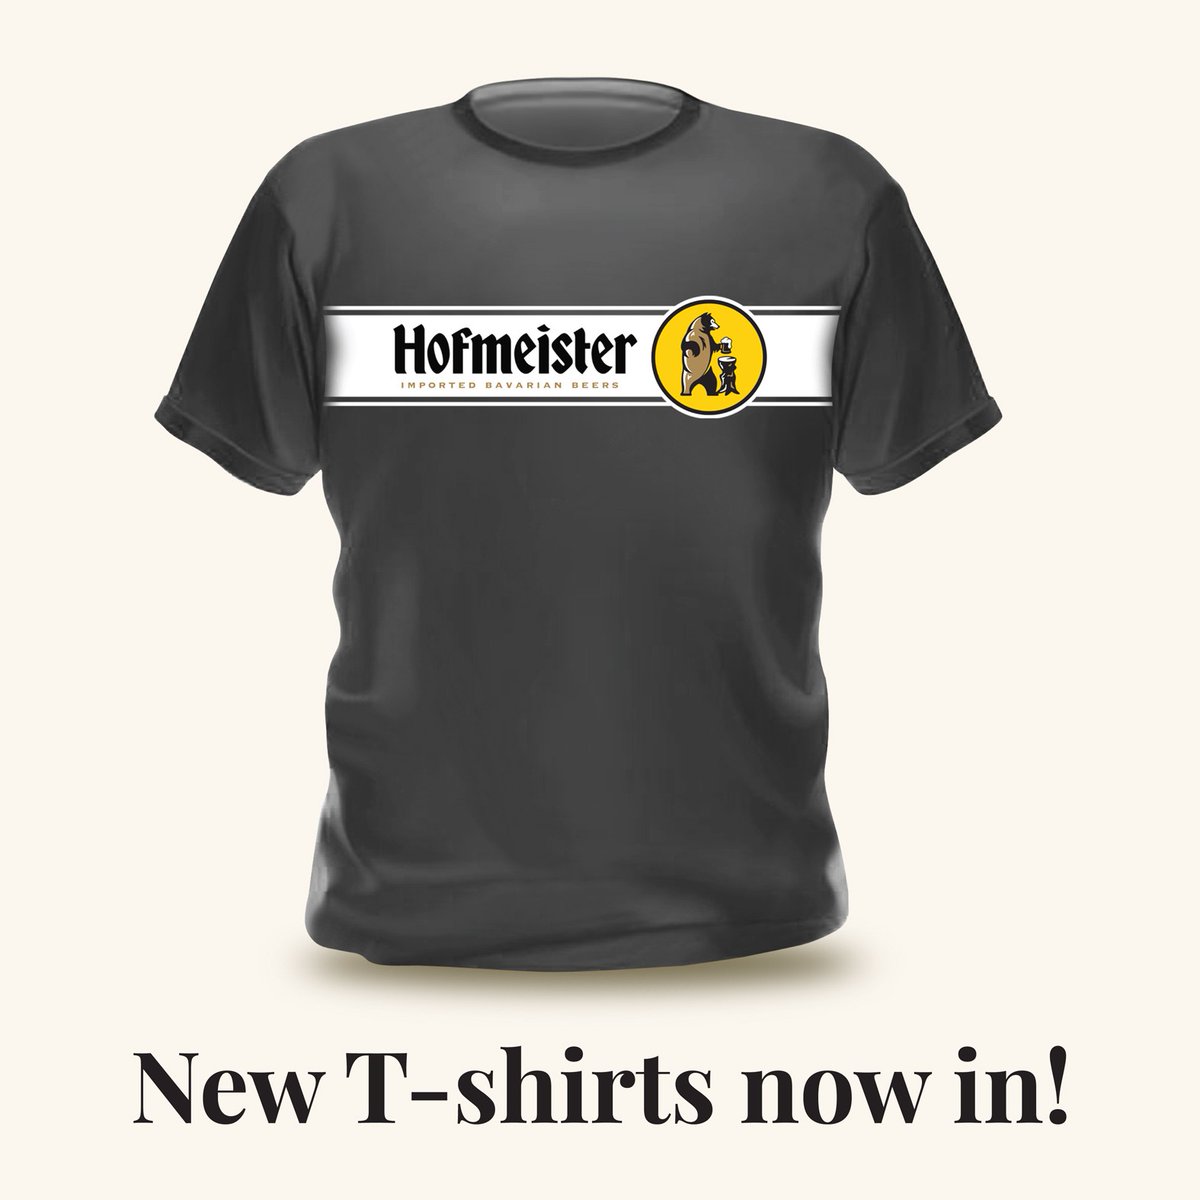 Look what's landed - just as the sun came out ☀️ Our Hof t-shirts have had a make-over and this new edition is available right now over on the Hof Shop. Get yours while they're still in stock⏱️ hofmeister.pulse.ly/efkrrq9e6e #Summer #FollowTheBear #Tshirt #HofmeisterBeer